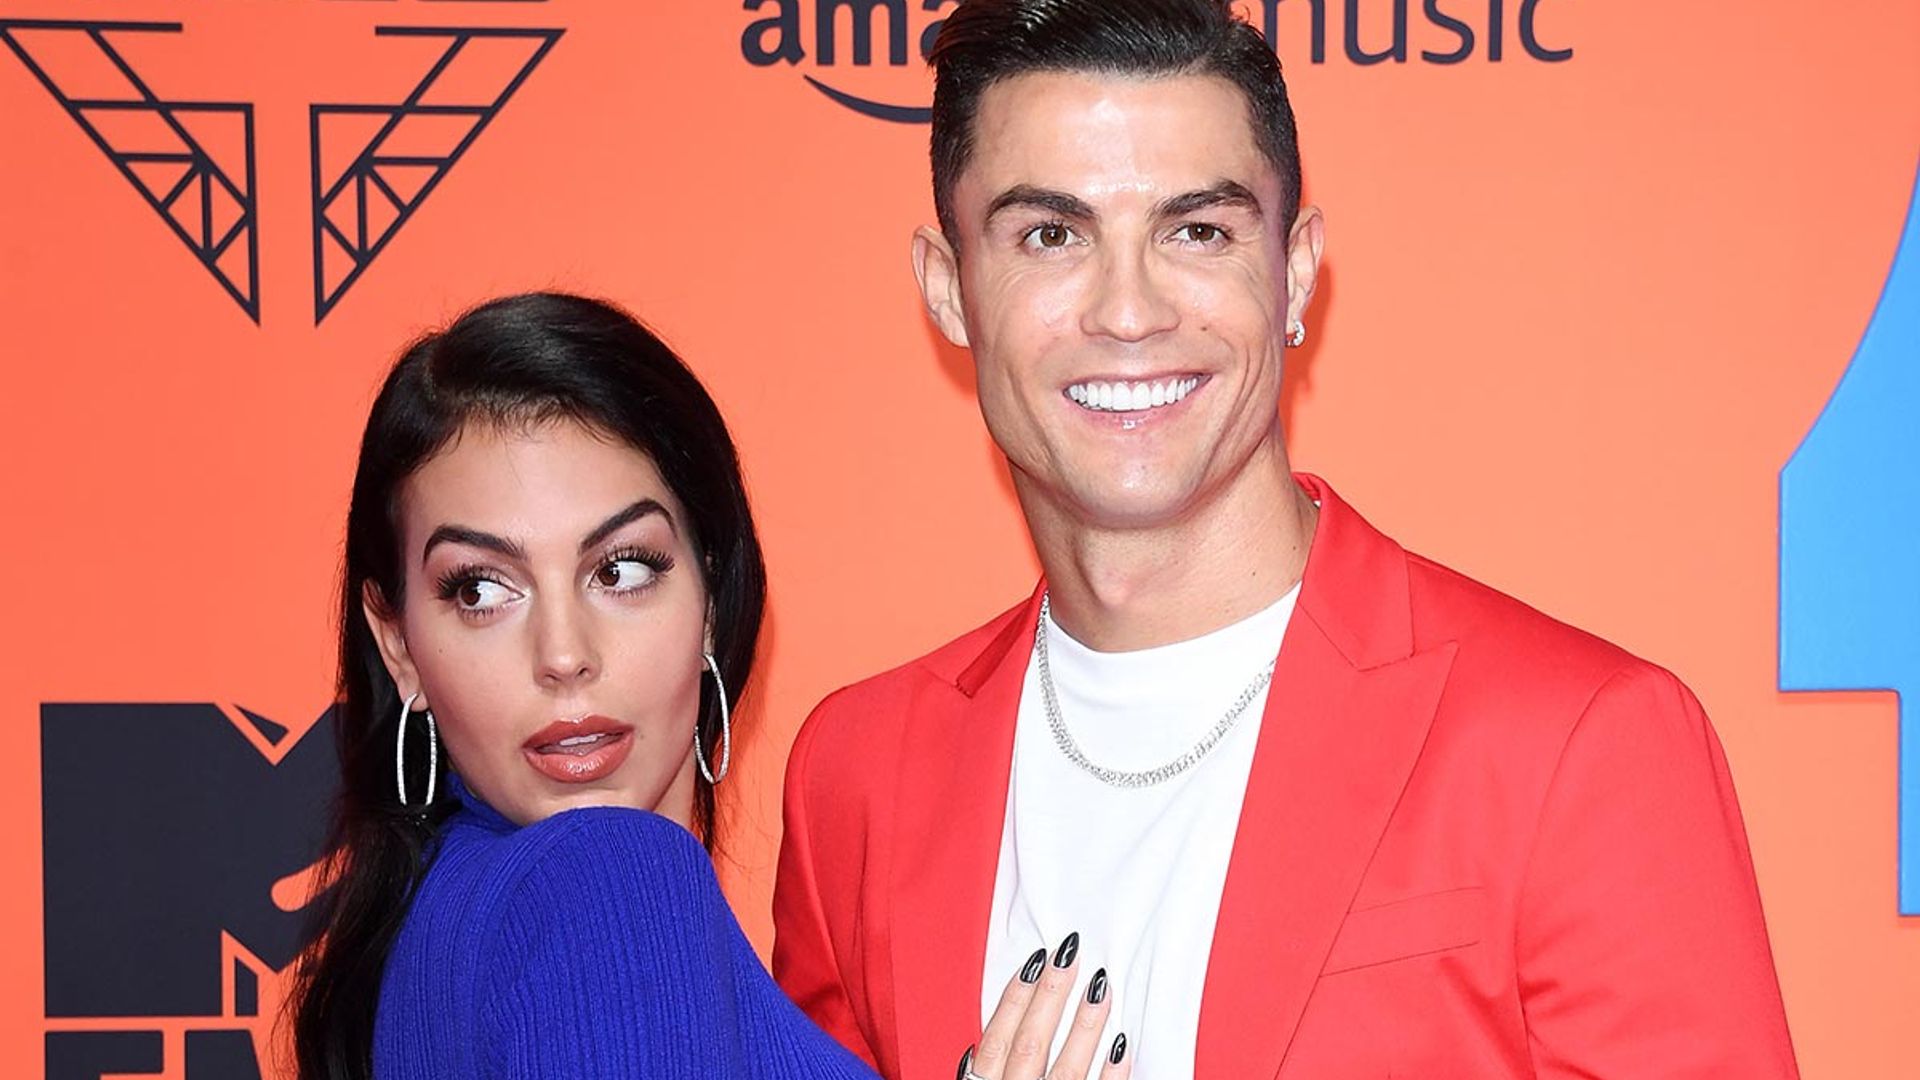 Cristiano Ronaldo set to become a twin dad again - see Georgina Rodriguez's pregnancy reveal